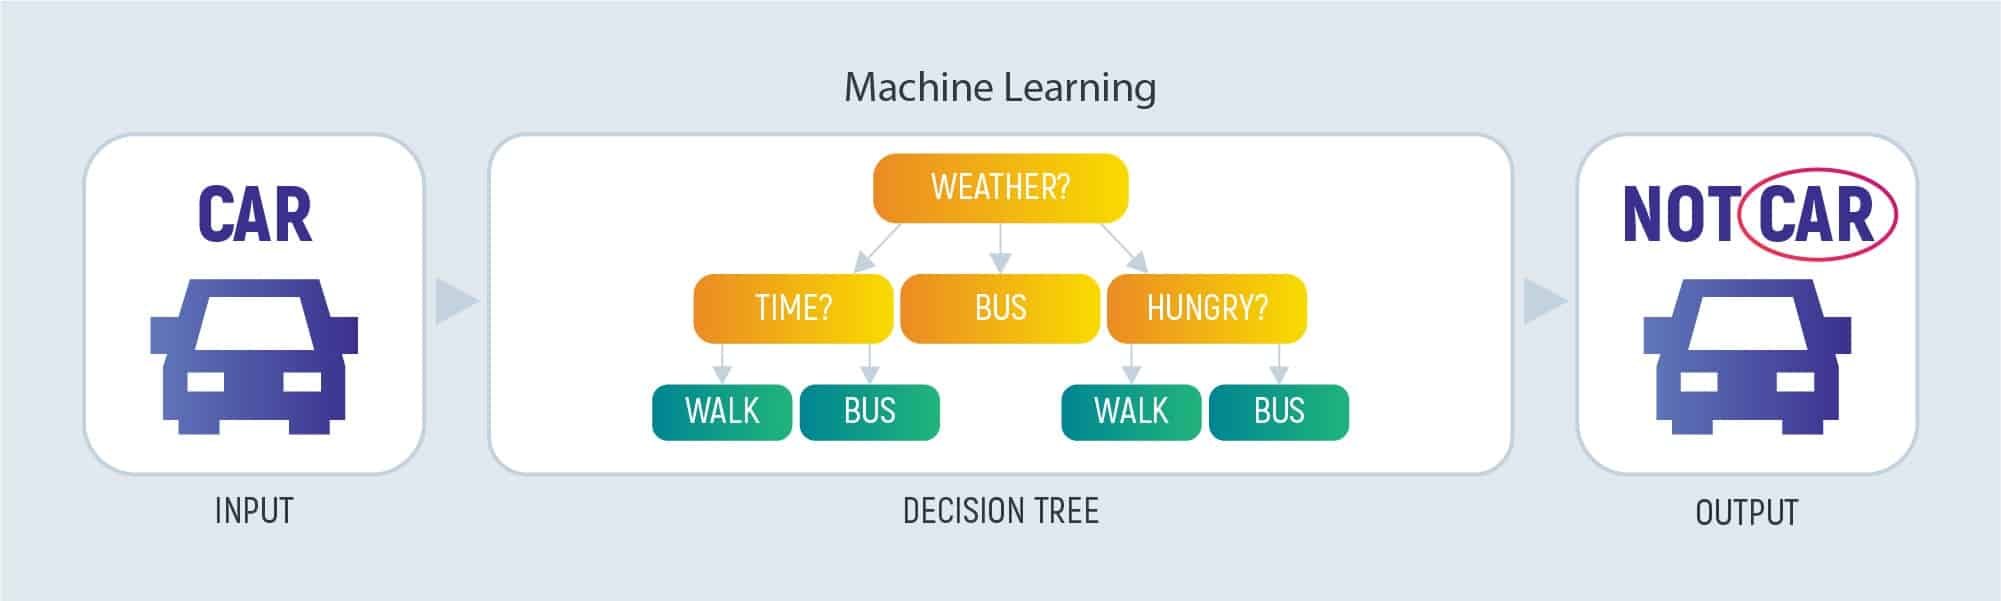 Why Use Python for Machine Learning?